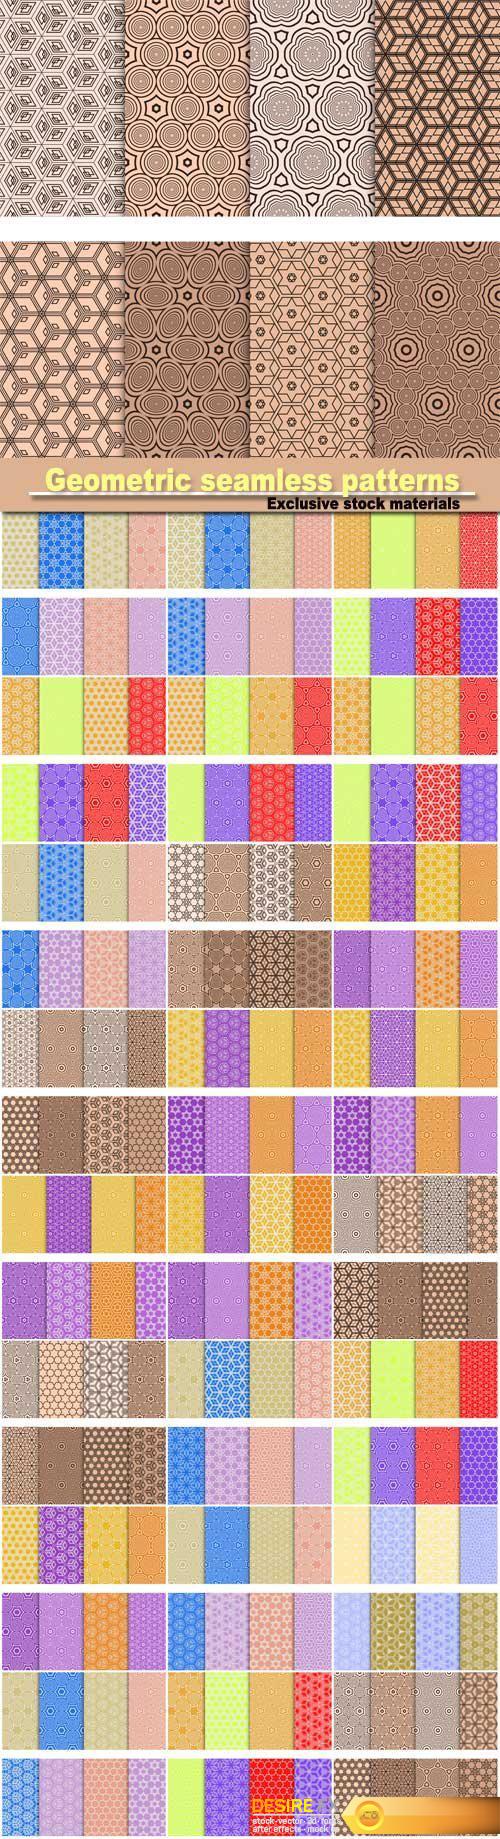 Geometric seamless patterns of the figures